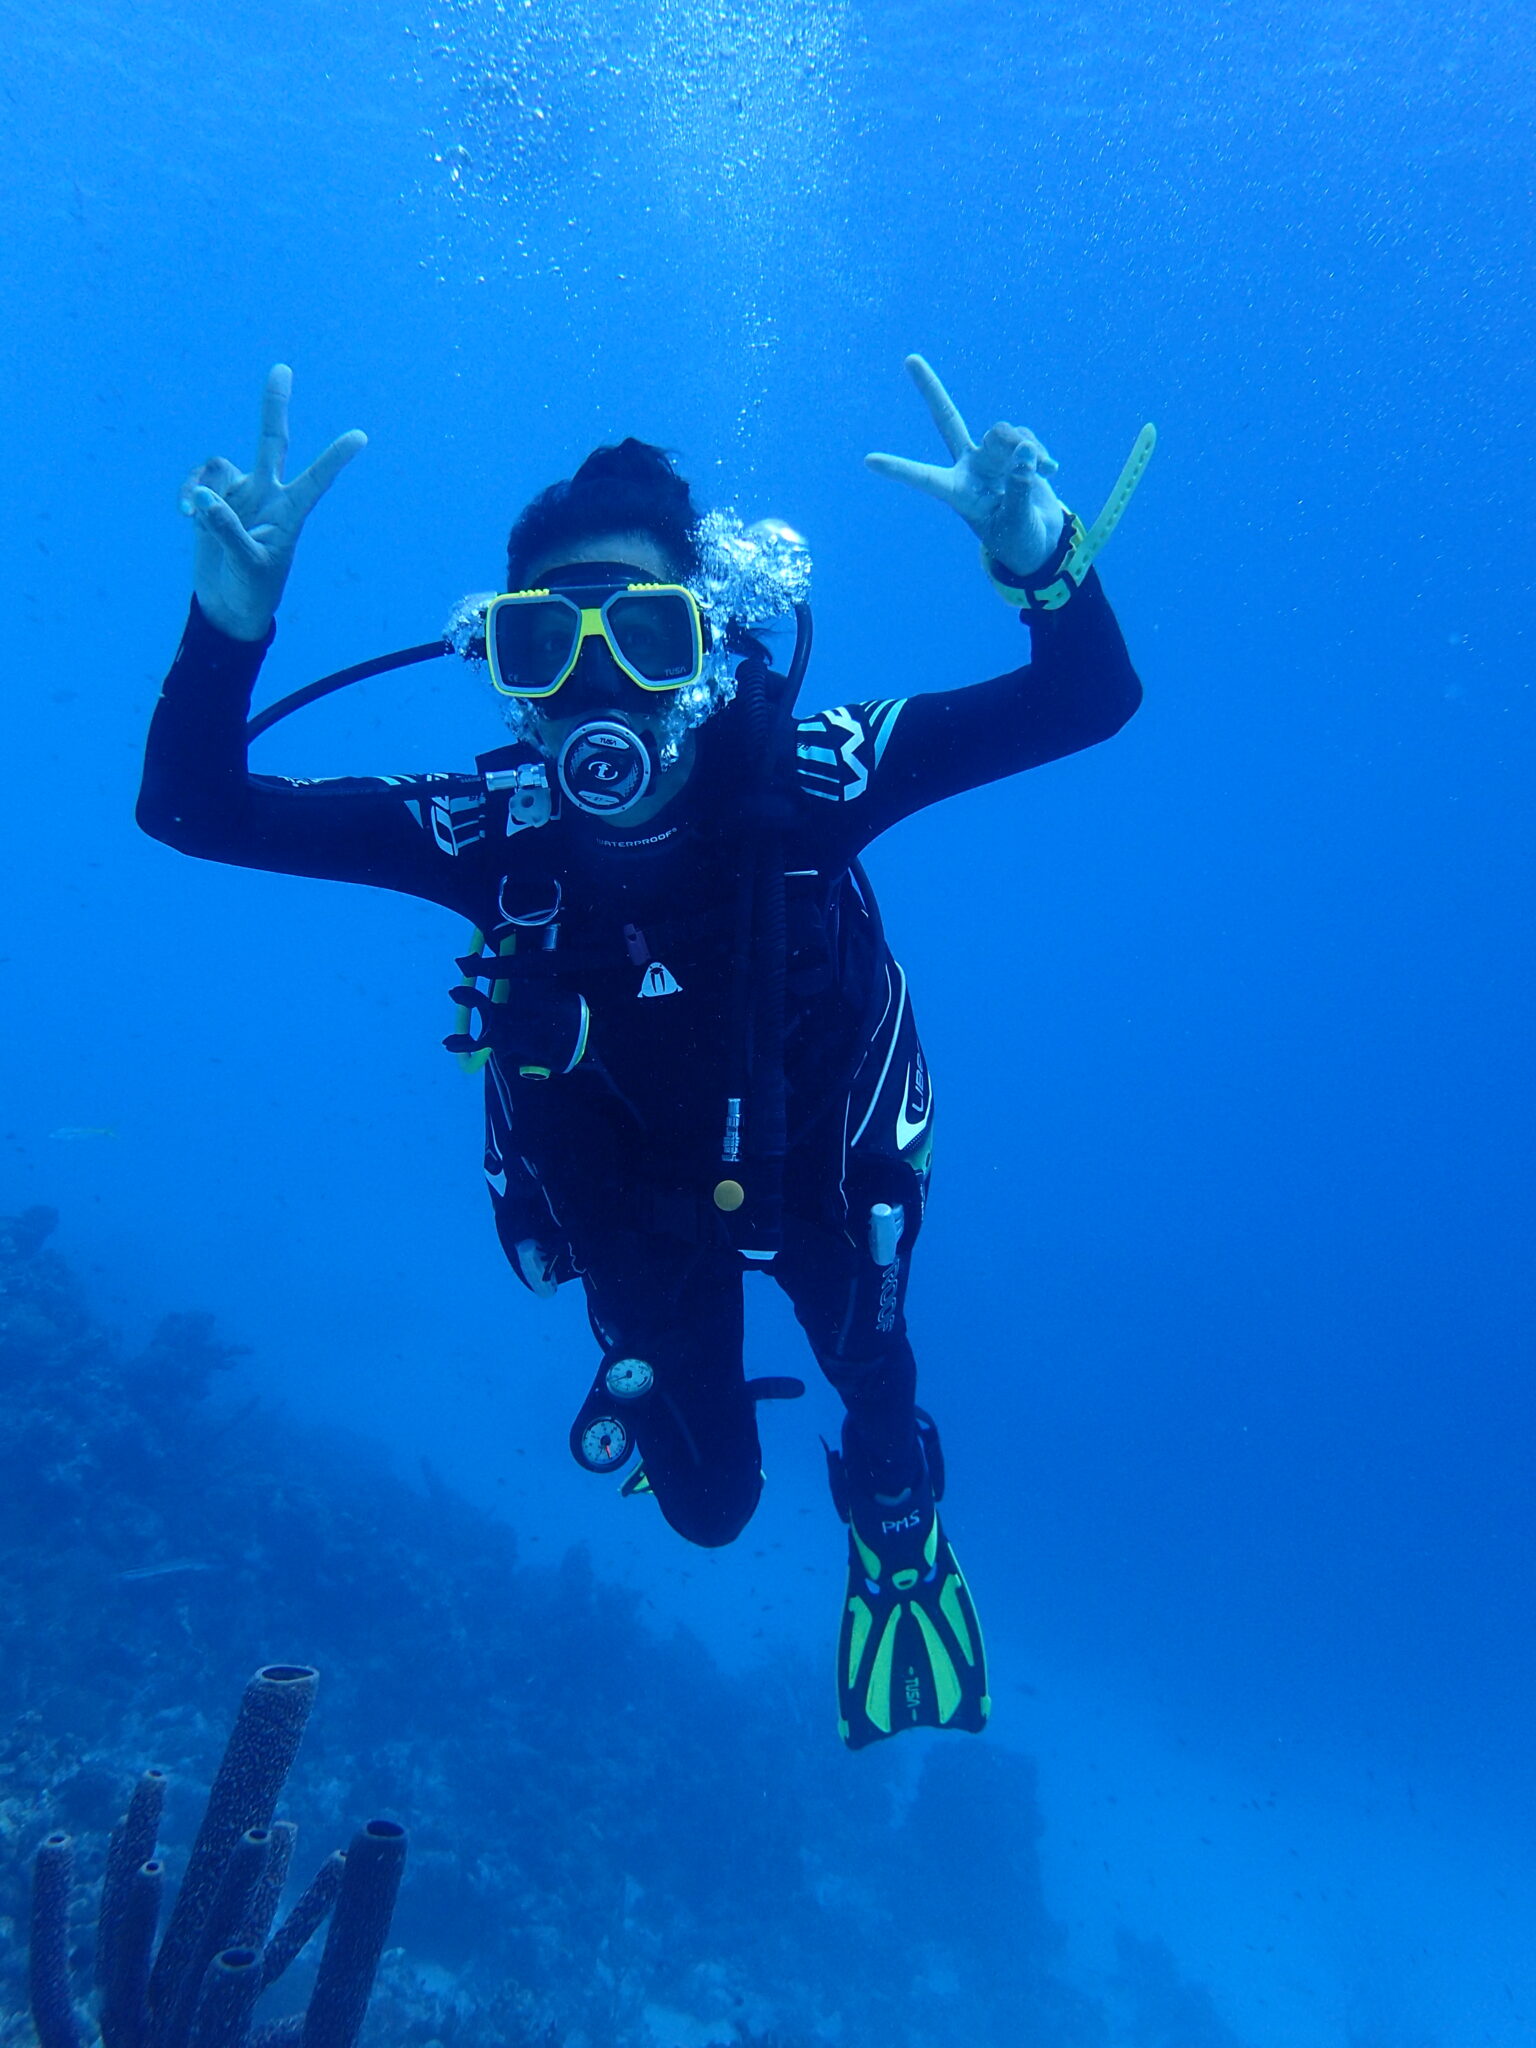 Ana Vigo holds up two peace signs while diving